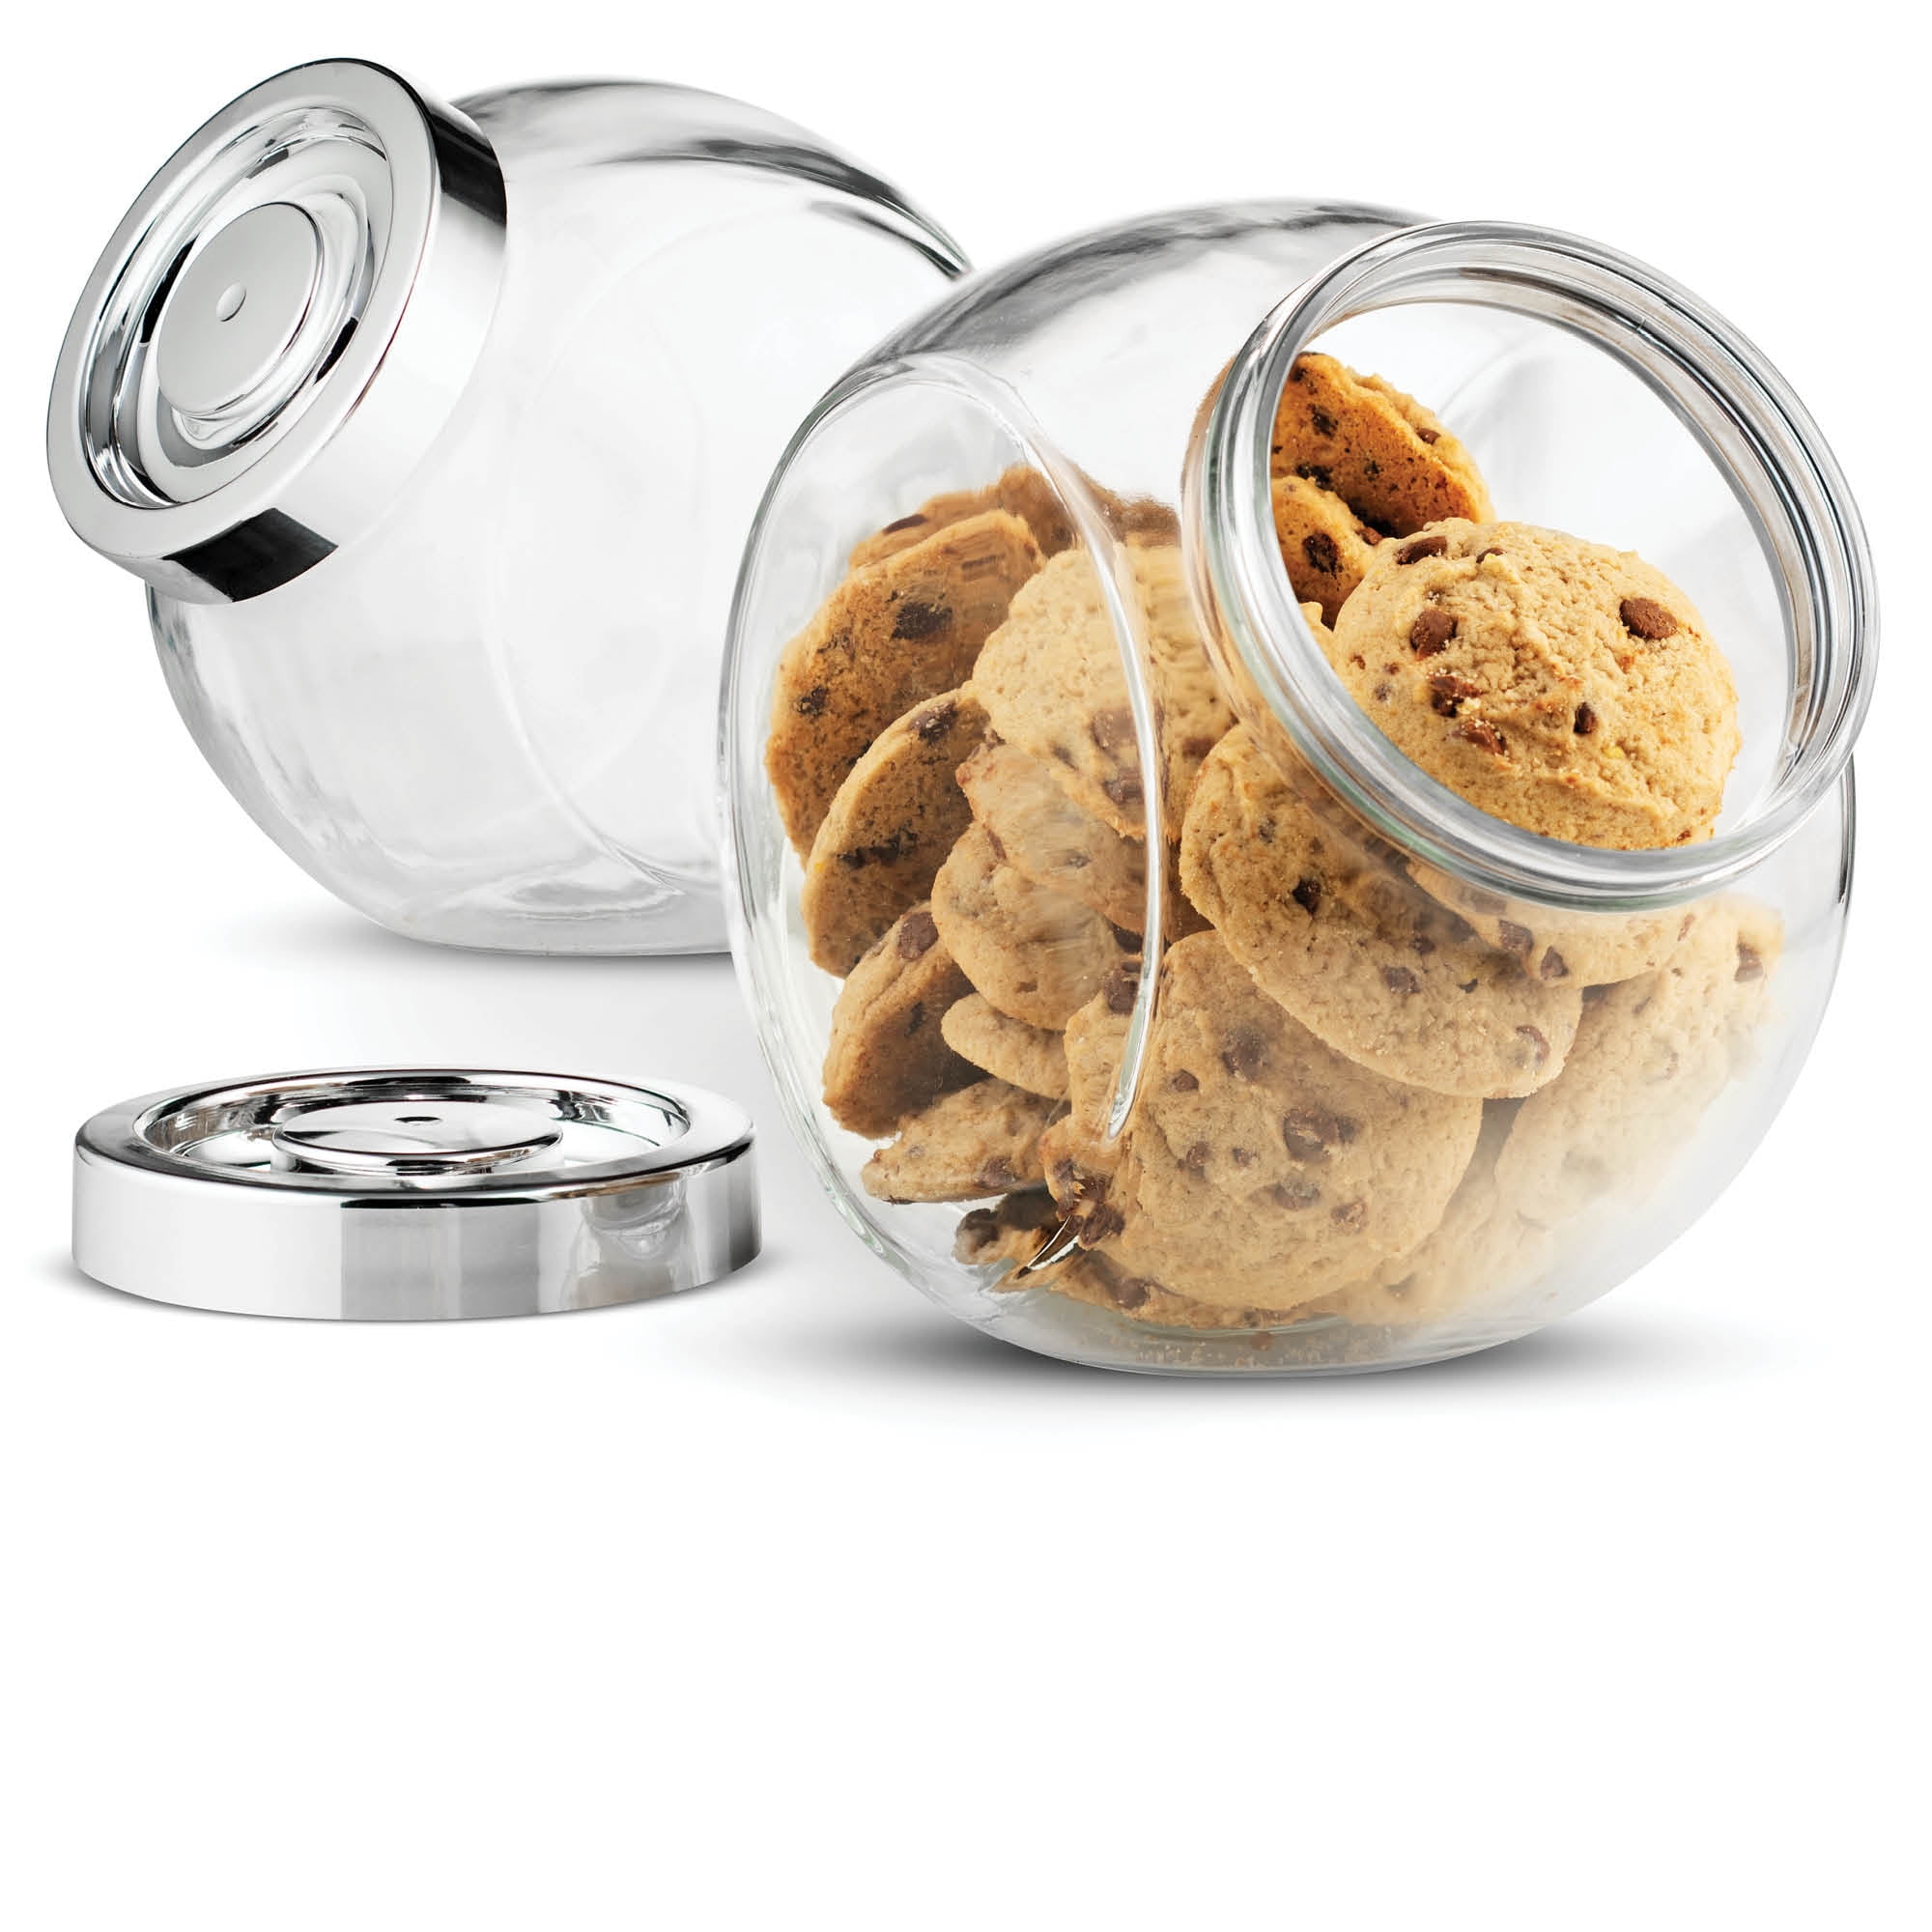 PANDORA Cookie Jar (2 Pack) 75.Â½ Ounce Glass Jar With Plastic Air-tight  Sealed Screw-on Lid 2 Ways Display for Candies, Pretzels, Dry Food, Flour,  Sugar, Jelly Bean Jar Canister, Clear 